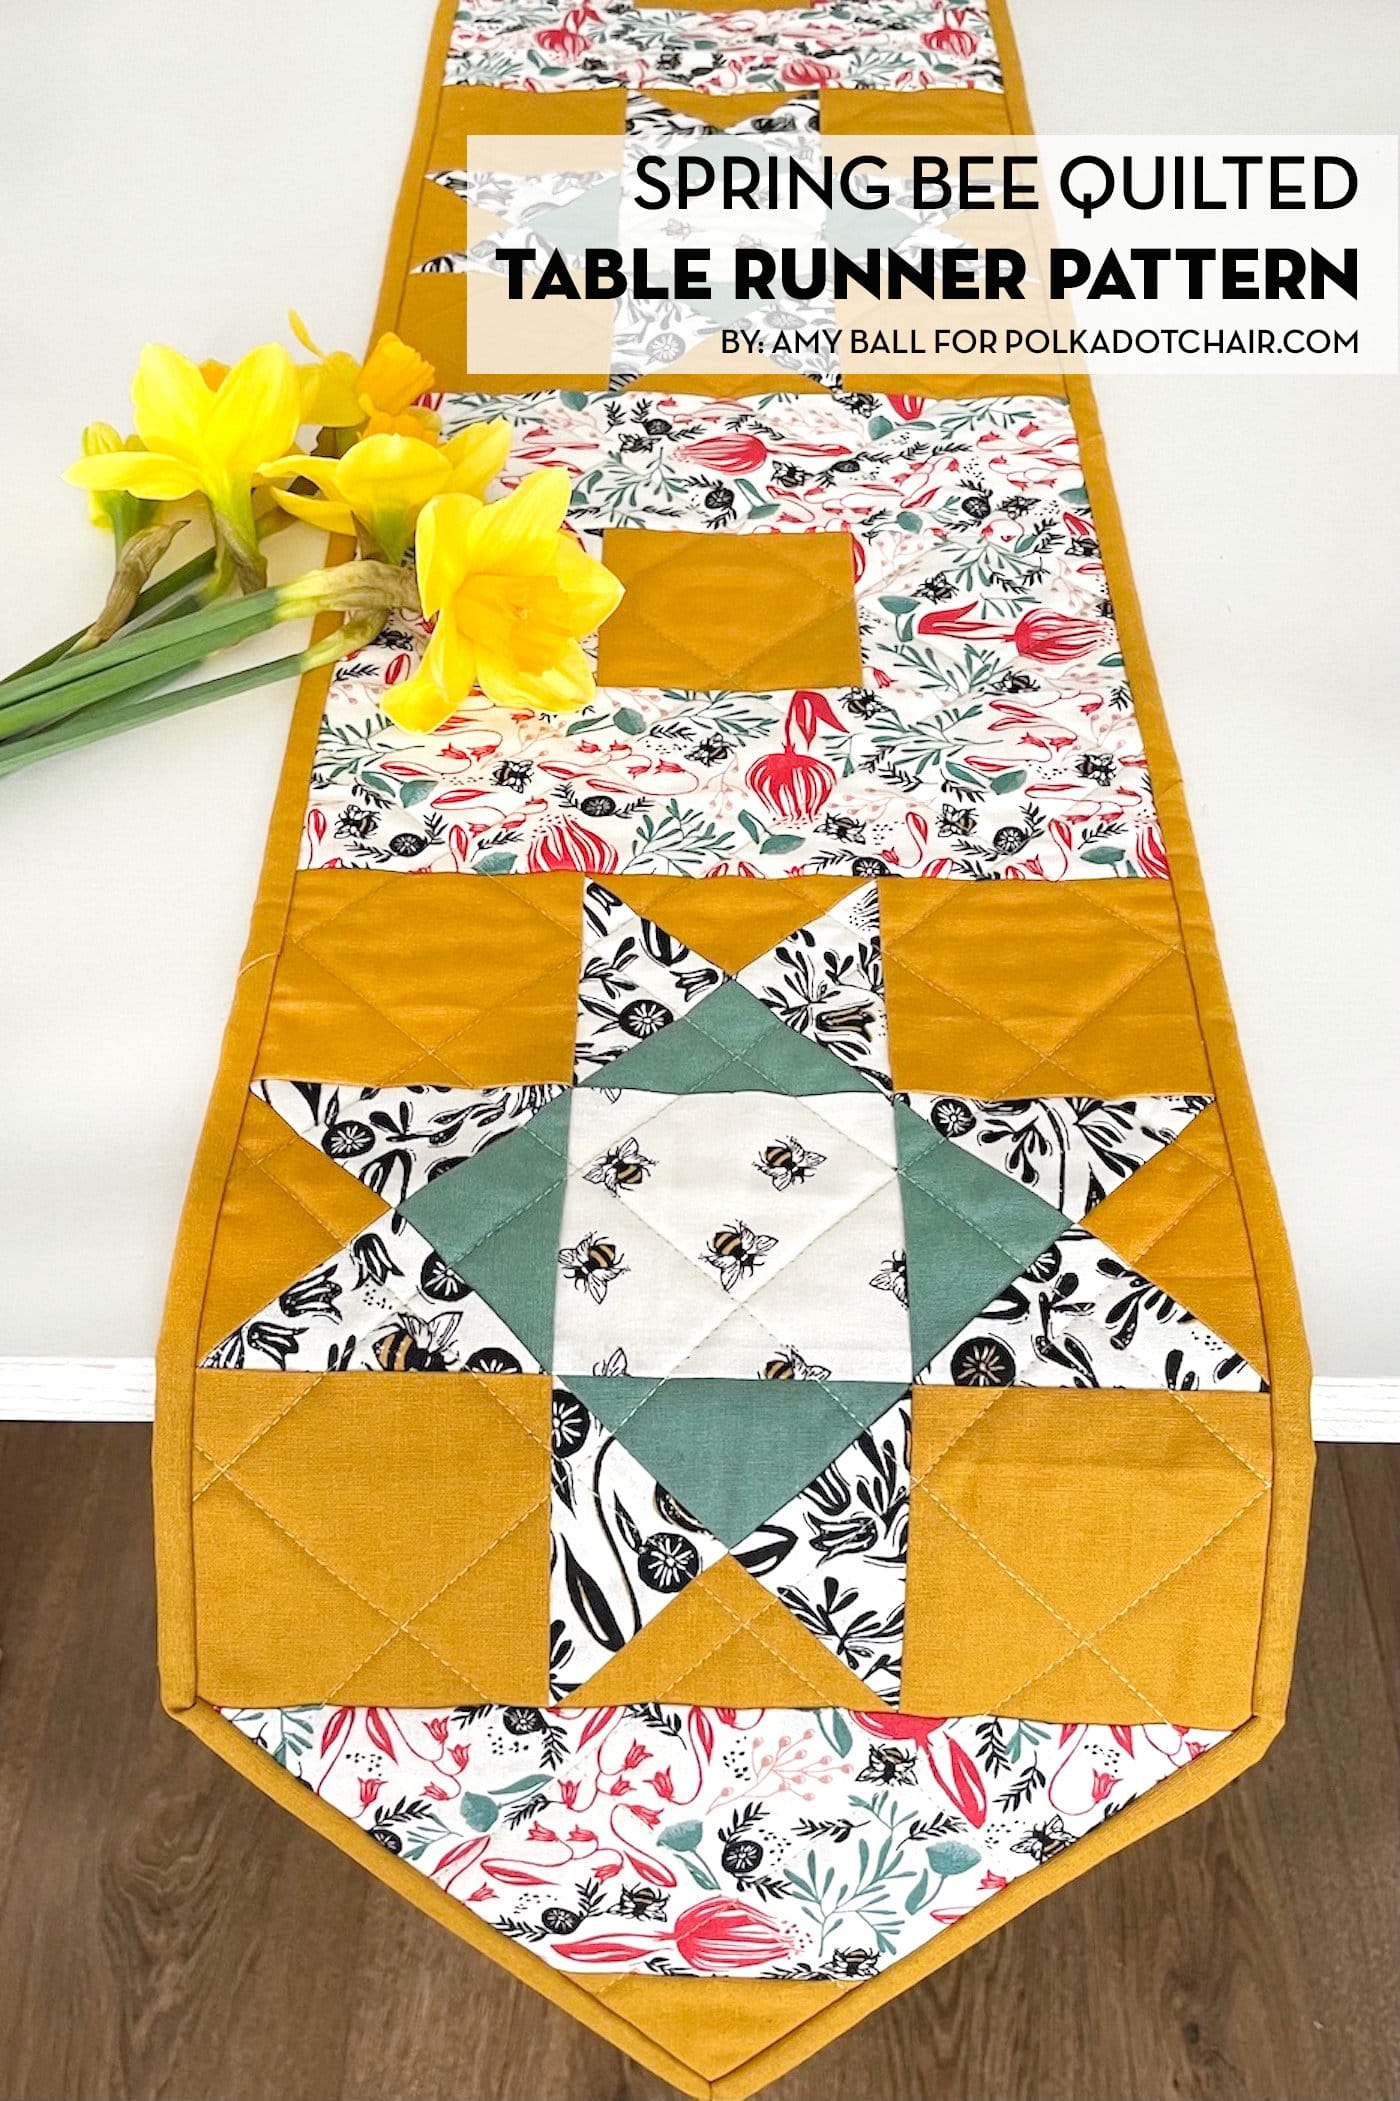 Spring “Bee” Quilted Table Runner Pattern